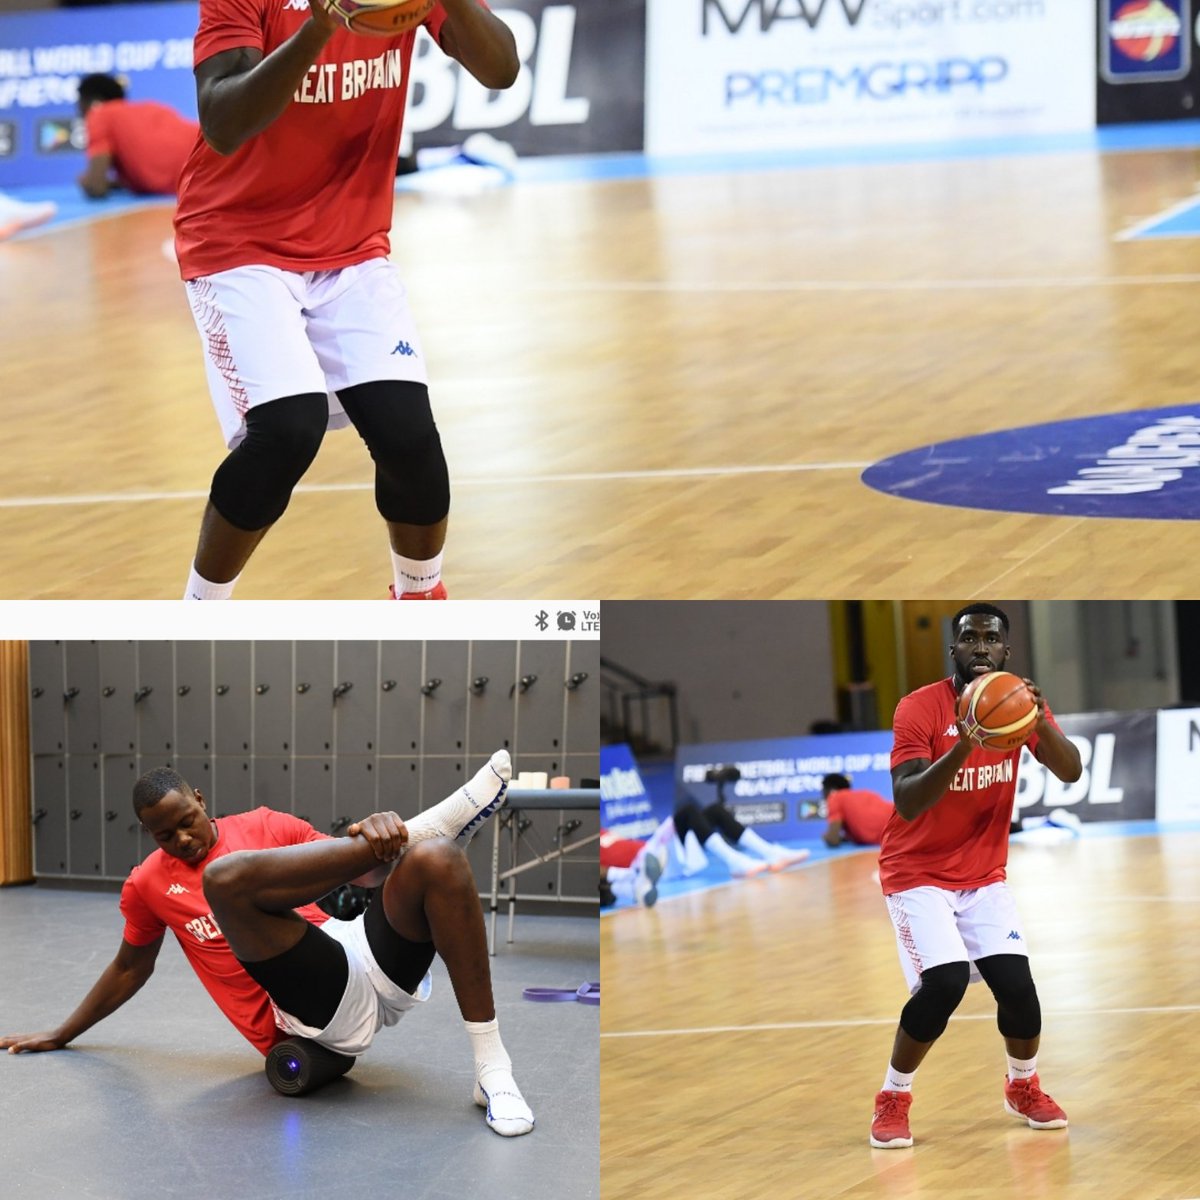 Great to see @gbbasketball team benefiting from our market leading patiented technology sock. We have all types of variation to help if you need help with problem areas of your feet. For any advise to suit your own team or individual needs, contact me on 07377135494 @premgripp